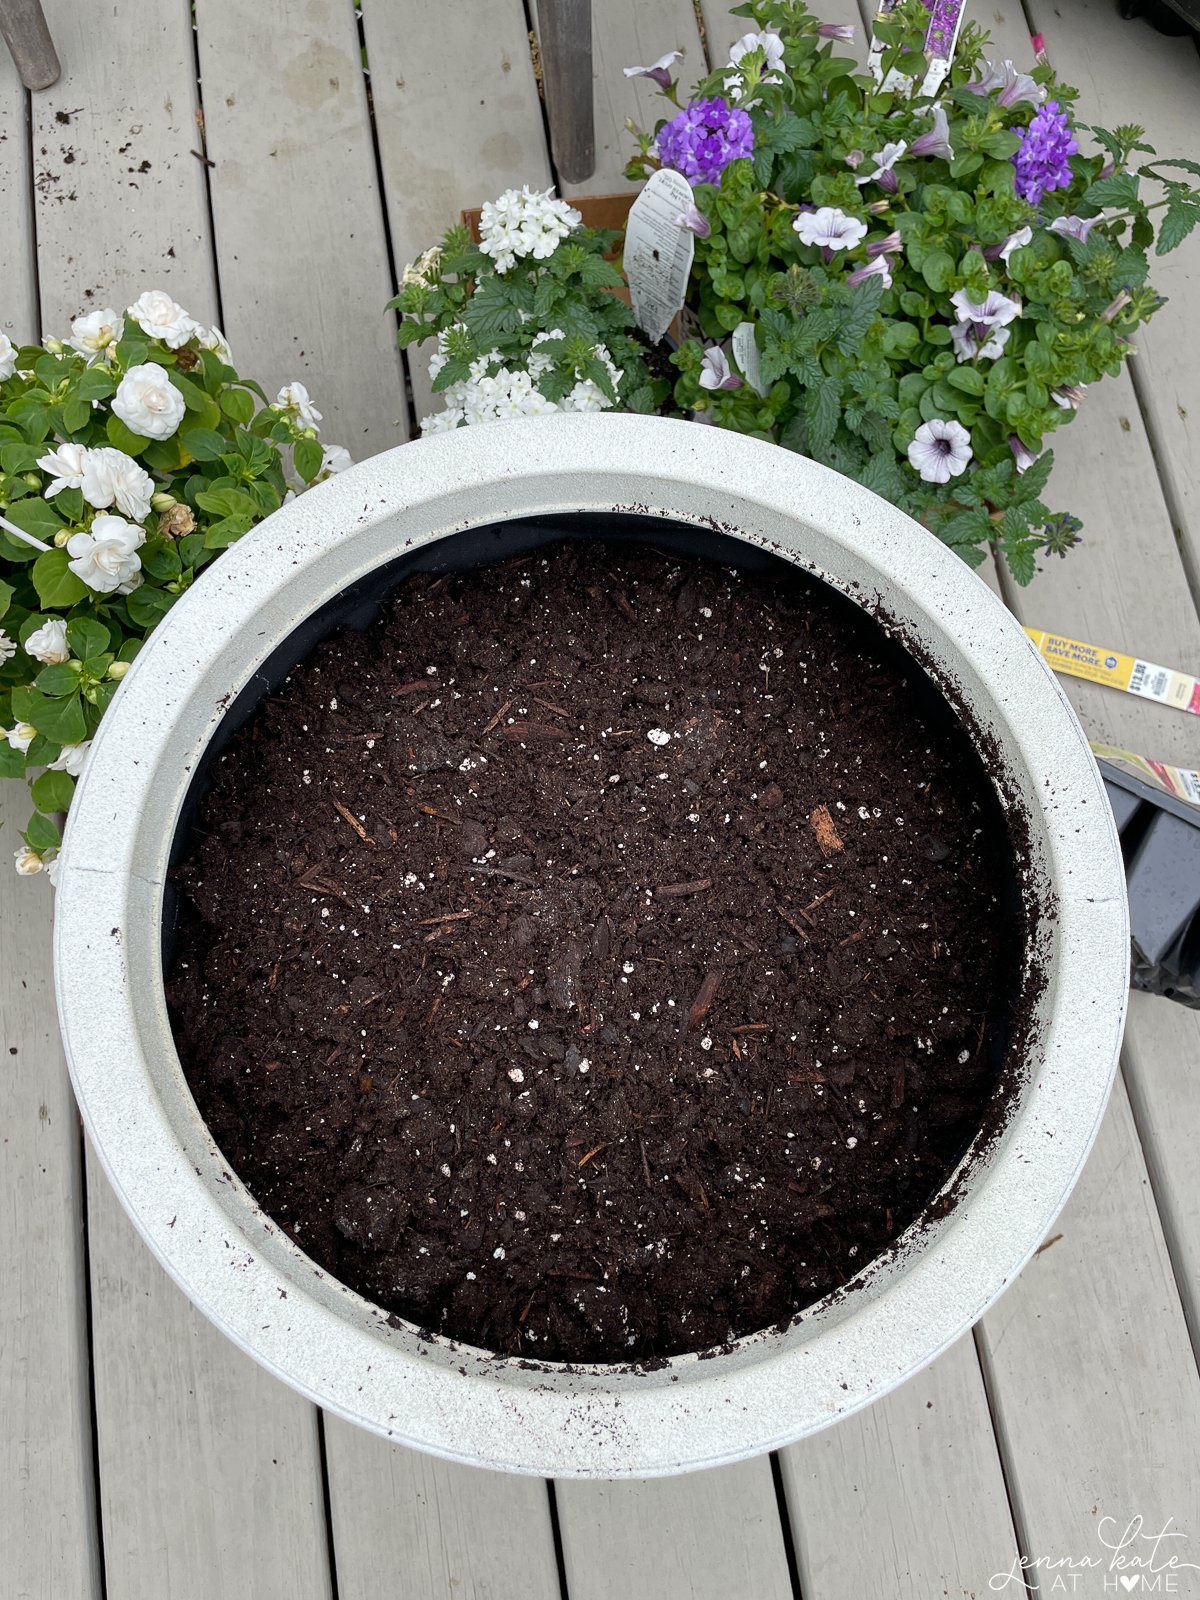 a large planter filled with potting soil